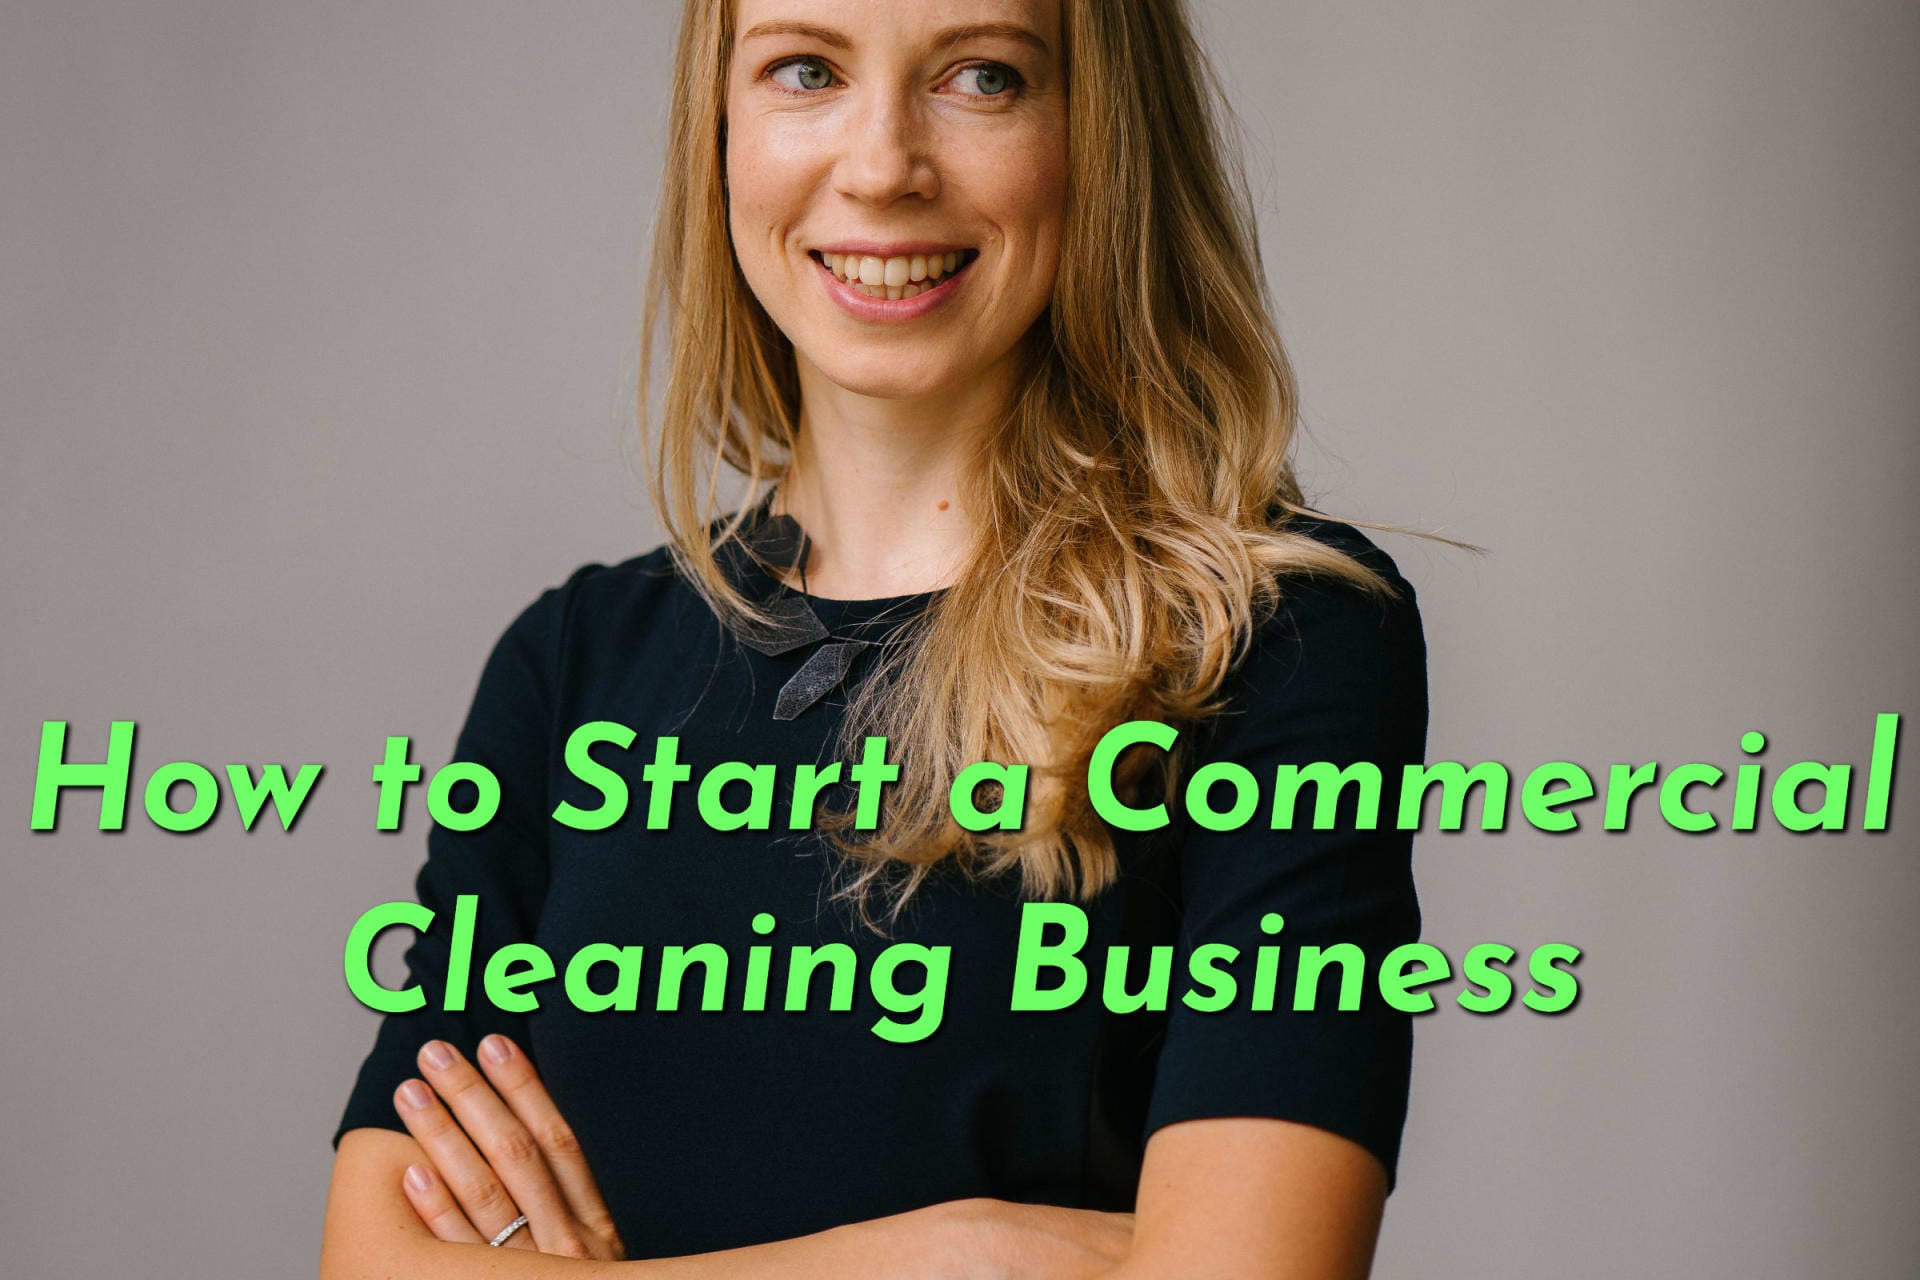 A woman excited about starting a commercial cleaning business